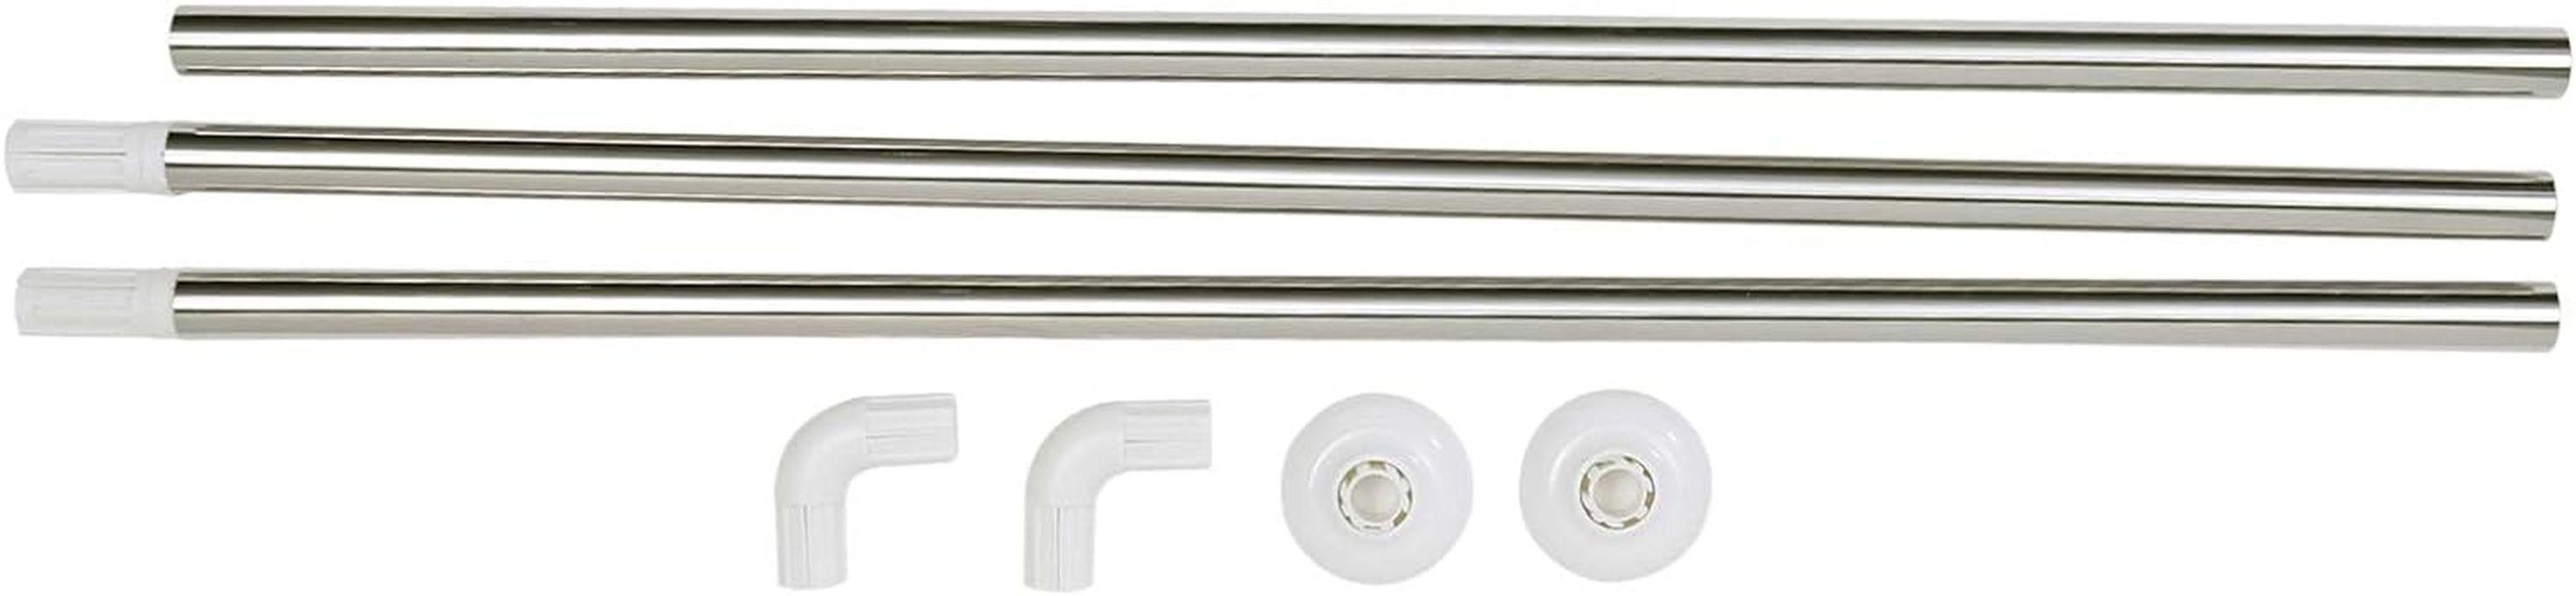 Shower Curtain Rod Suitable For L- And U-shaped Installation